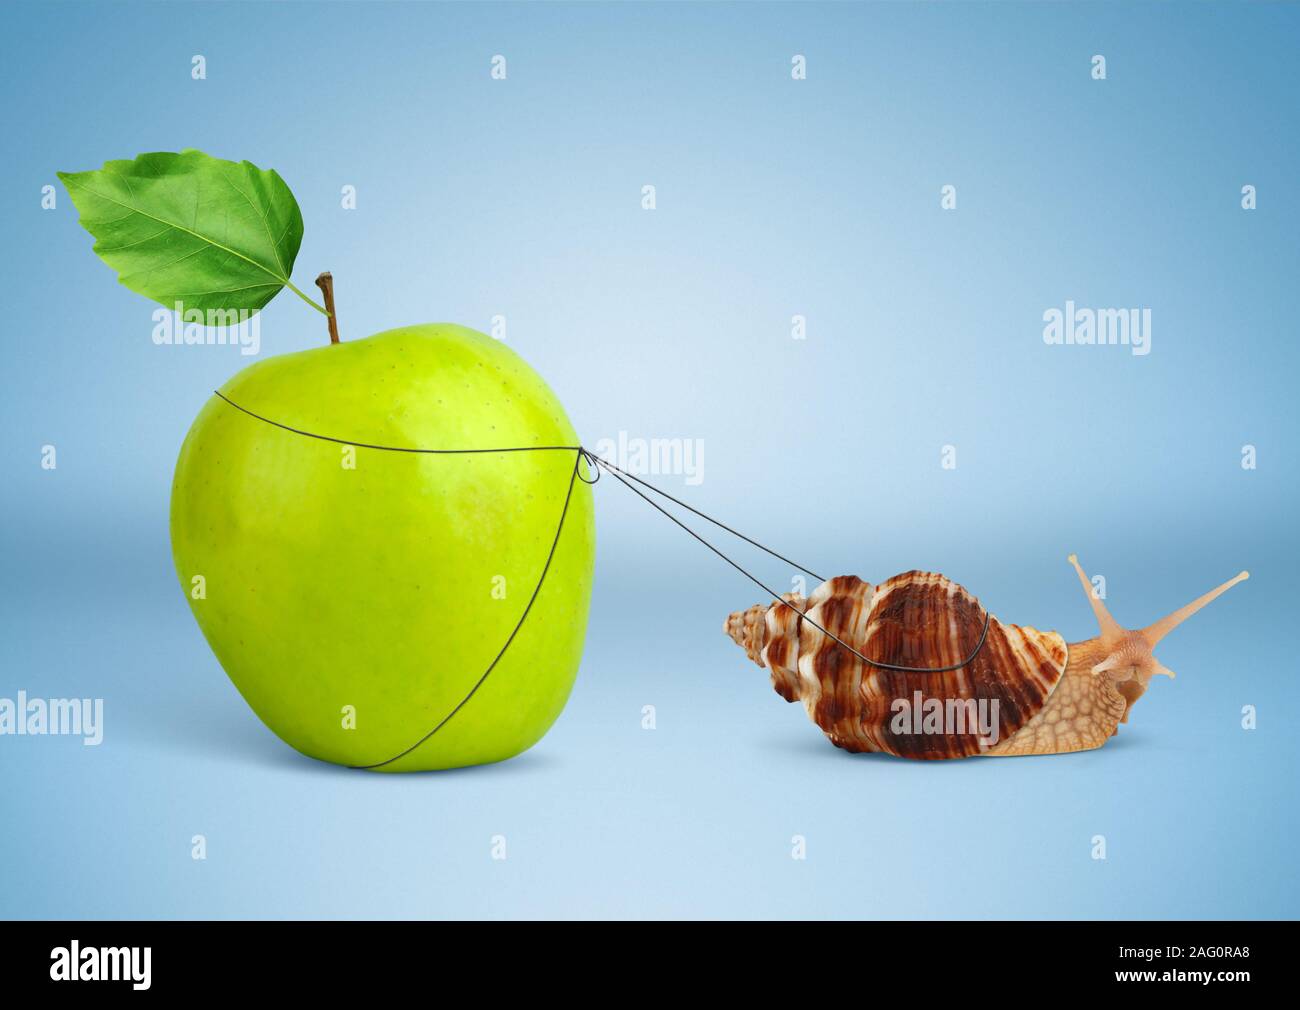 Snail pulling heavy apple, insistence concept Stock Photo